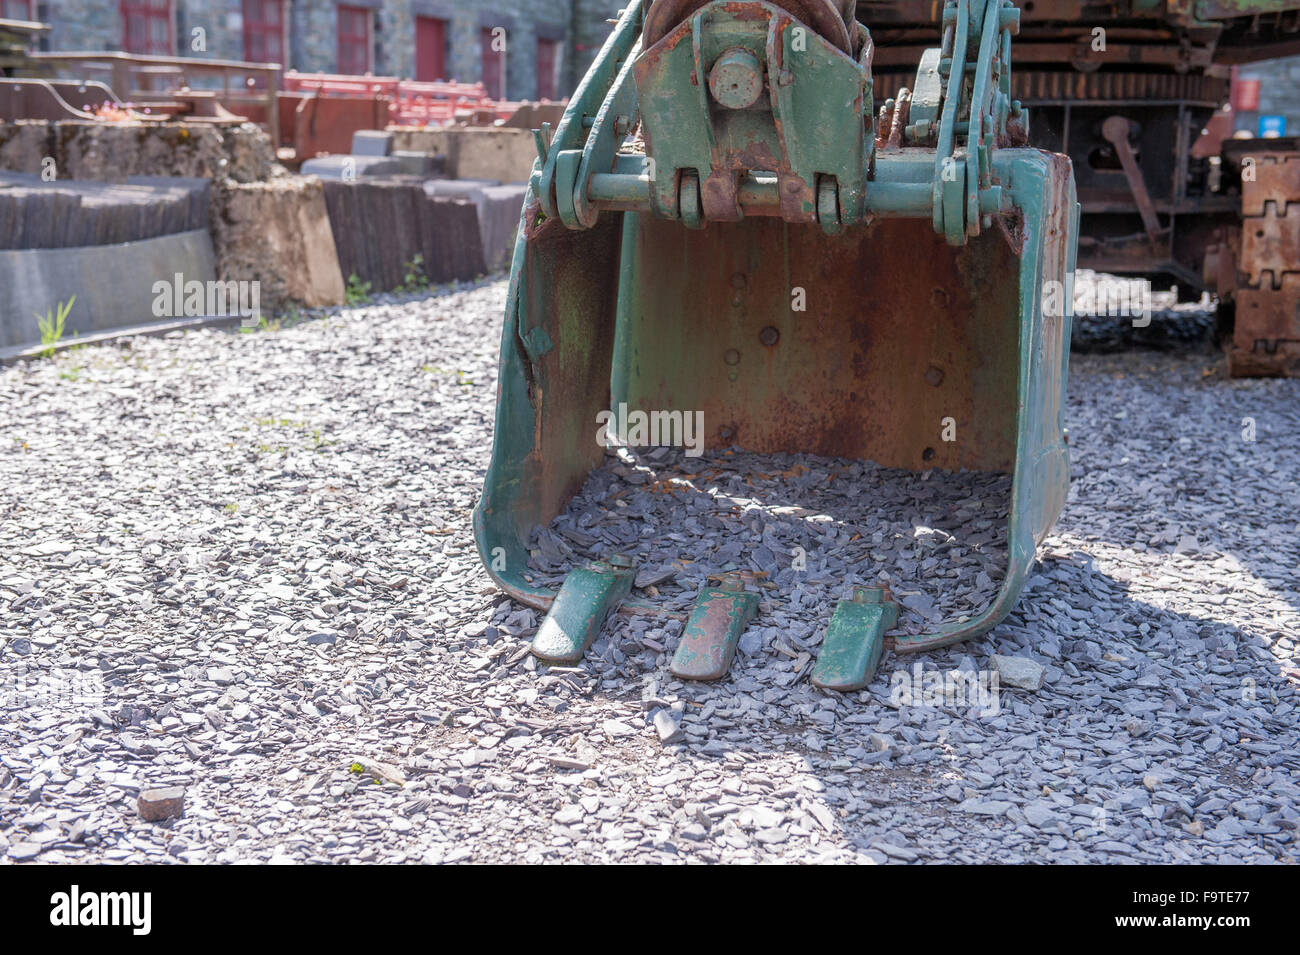 Large rusty digging bucket on big industrial digger Stock Photo